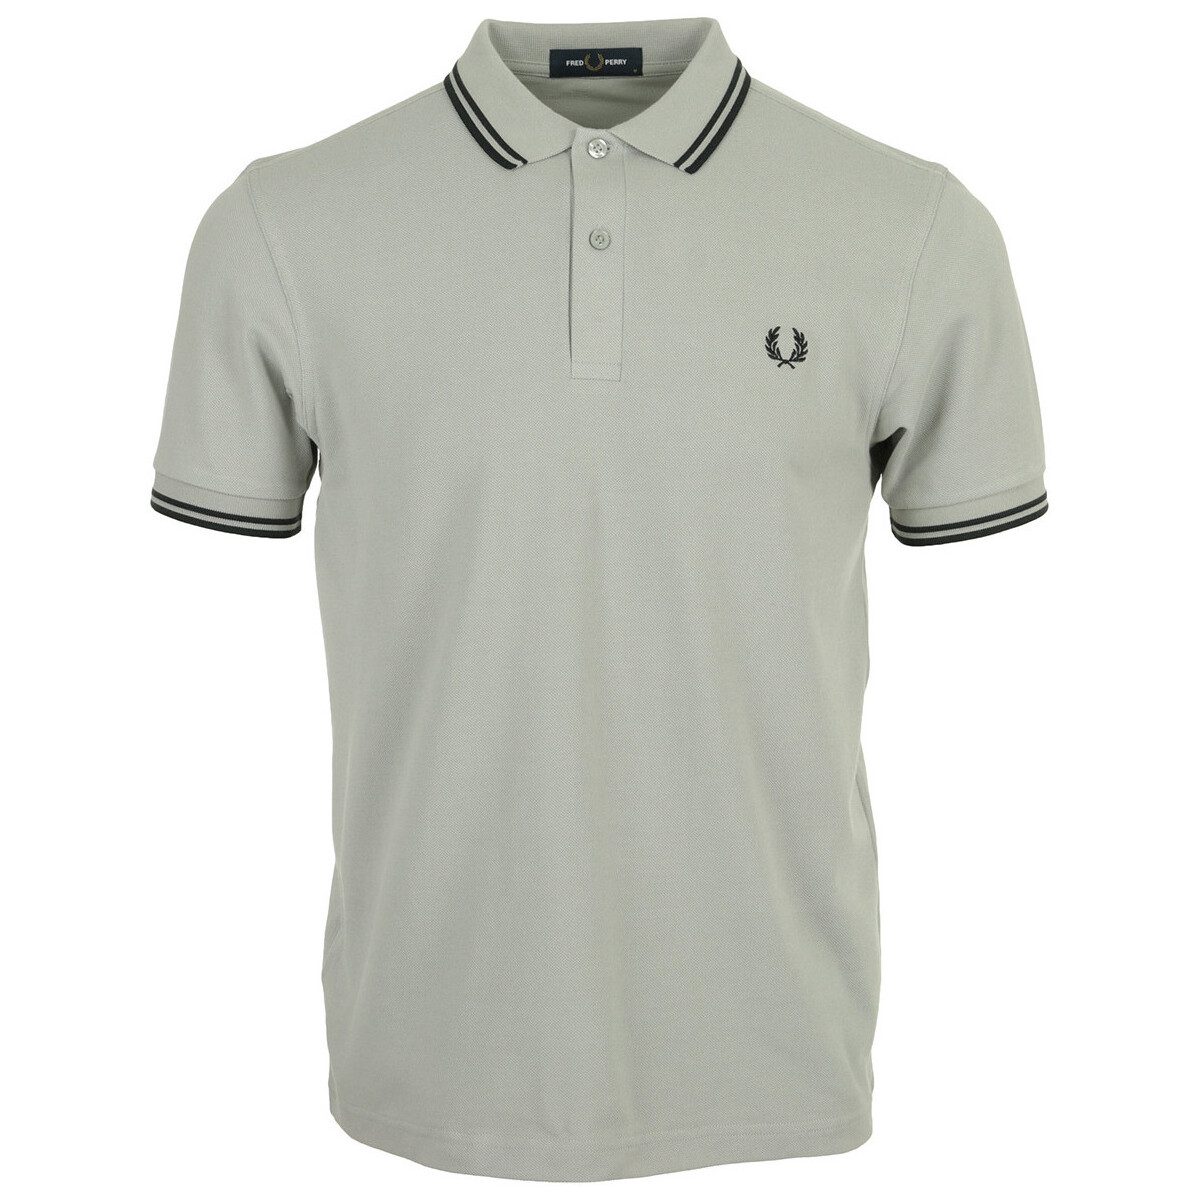 Kleidung Herren T-Shirts & Poloshirts Fred Perry Twin Tipped Grau